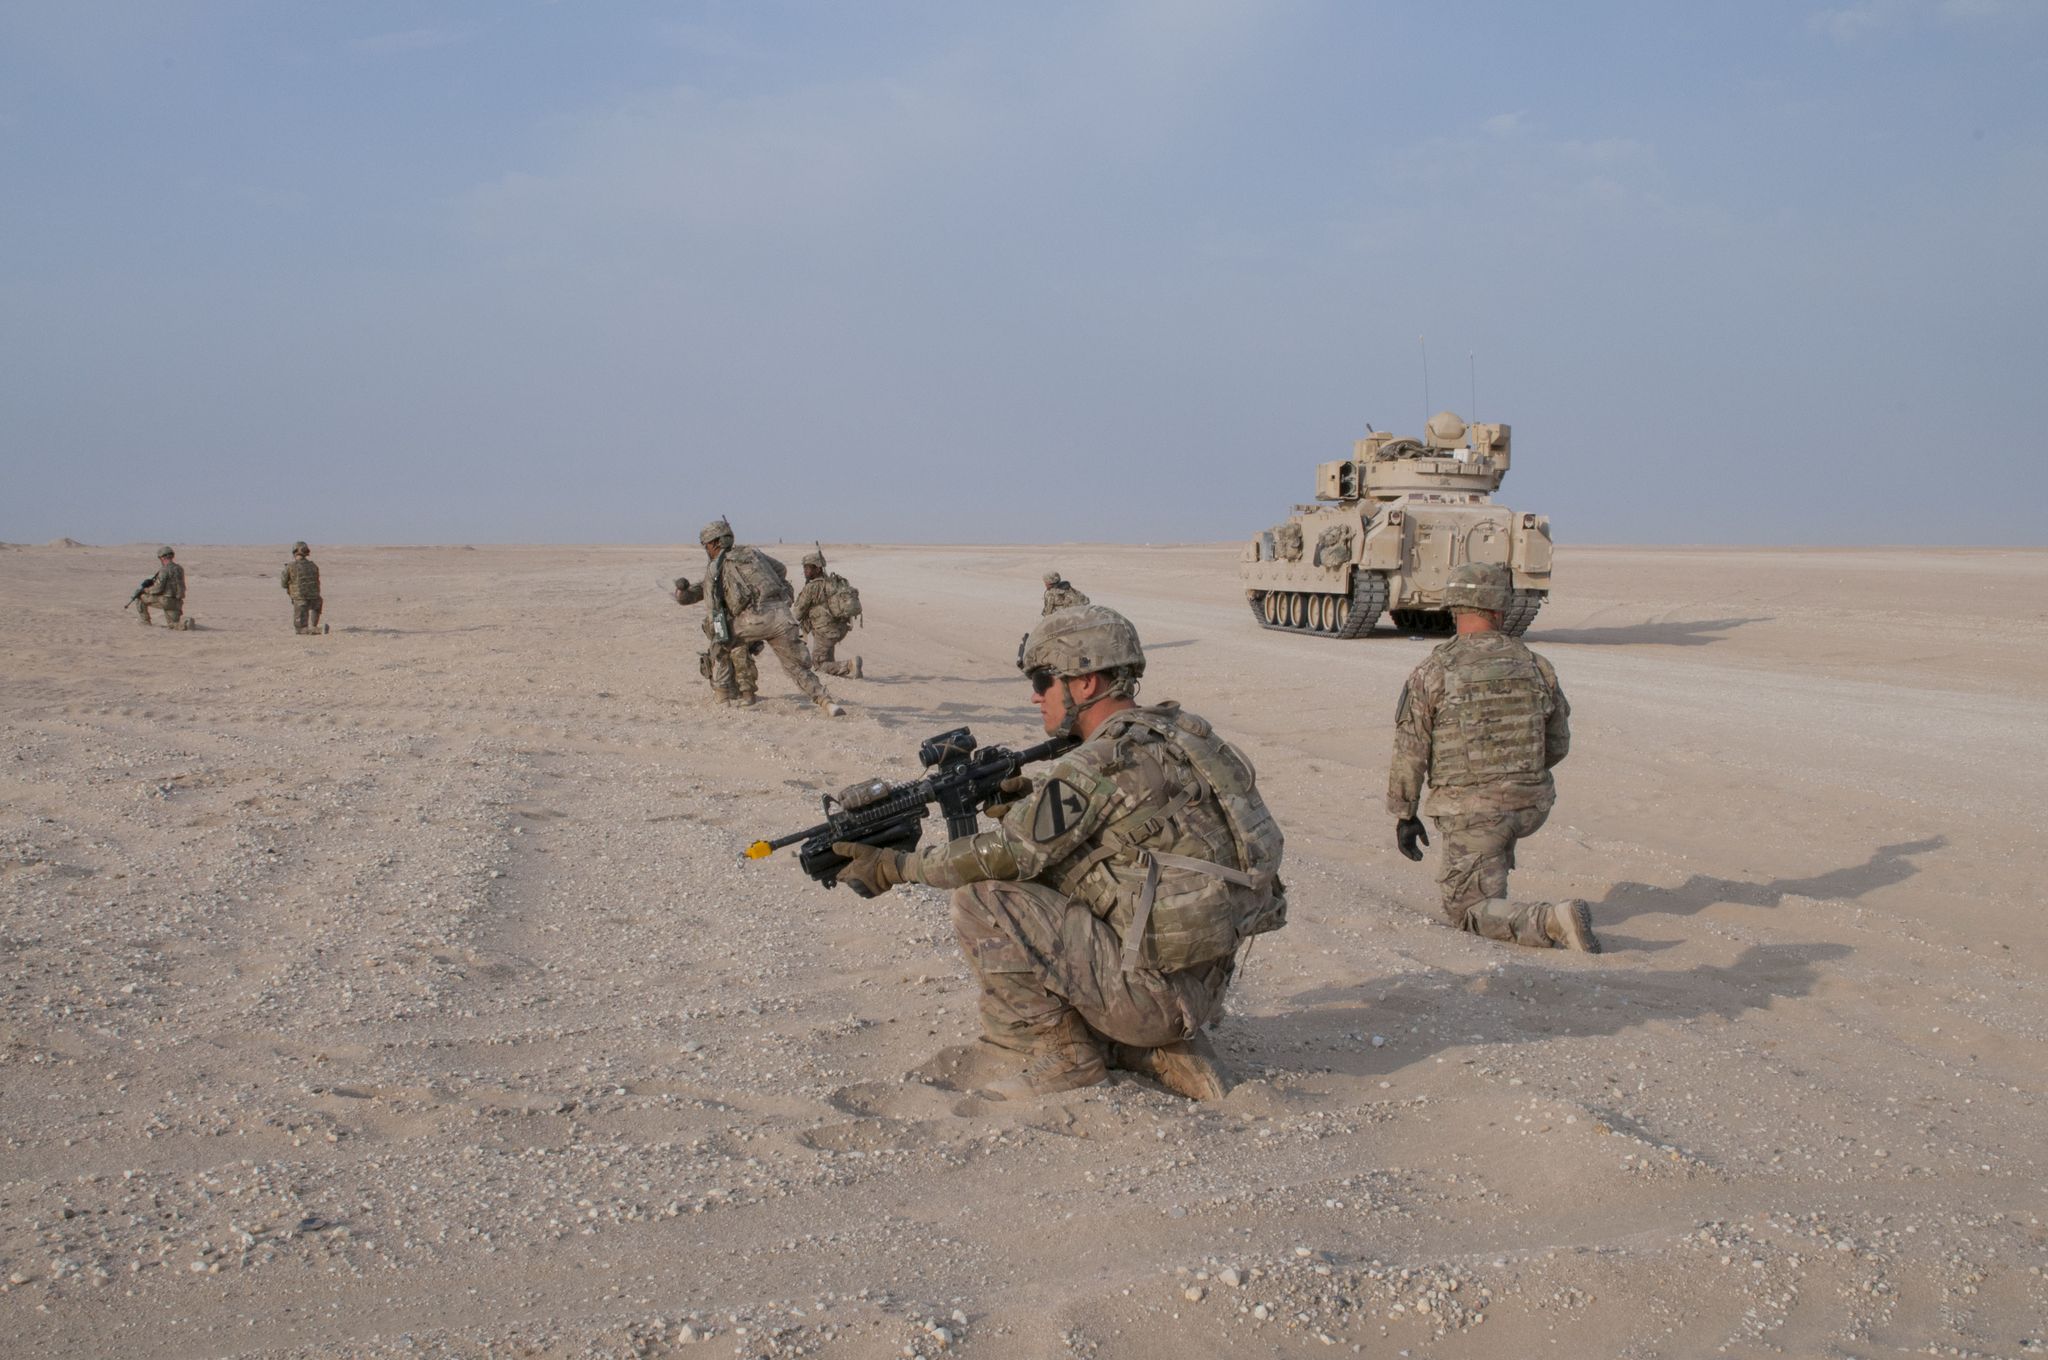 soldiers with c company, 1st battalion, 12th cavalry regiment, prepare to move forward during an attack against a simulated compound during an exercise on udari range complex near camp buehring, kuwait, oct 17, 2017 the infantry unit conducted a platoon mounted and dismounted assault on an objective, an exercise that better prepares it to certify for future deployments after it returns to the us us army photo by sgt david l nye, us arcent pao